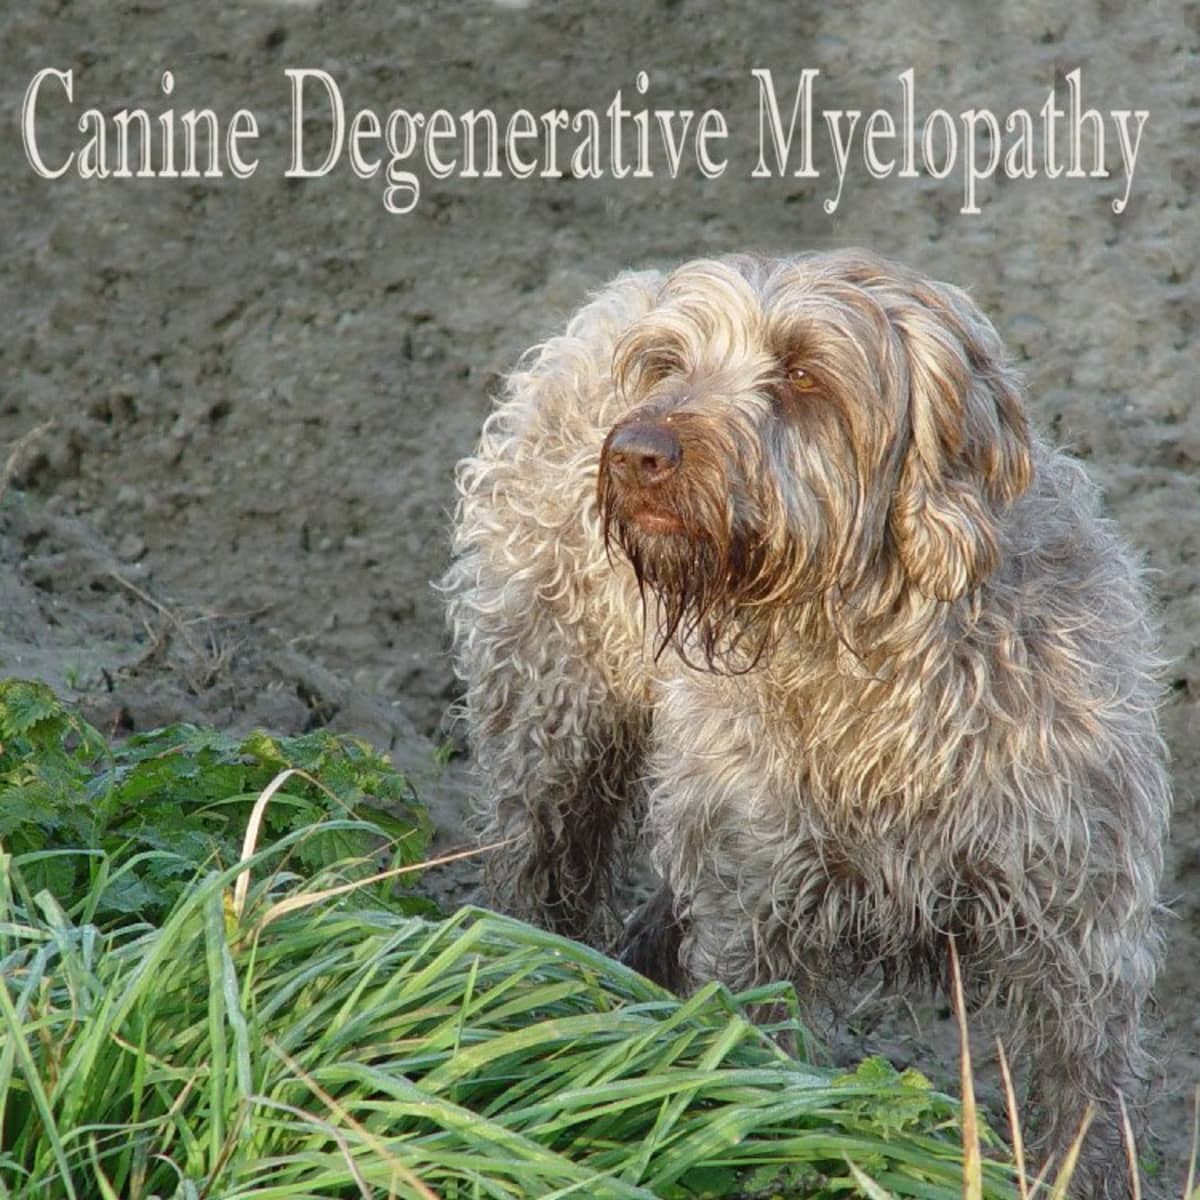 do dogs with degenerative myelopathy have pain